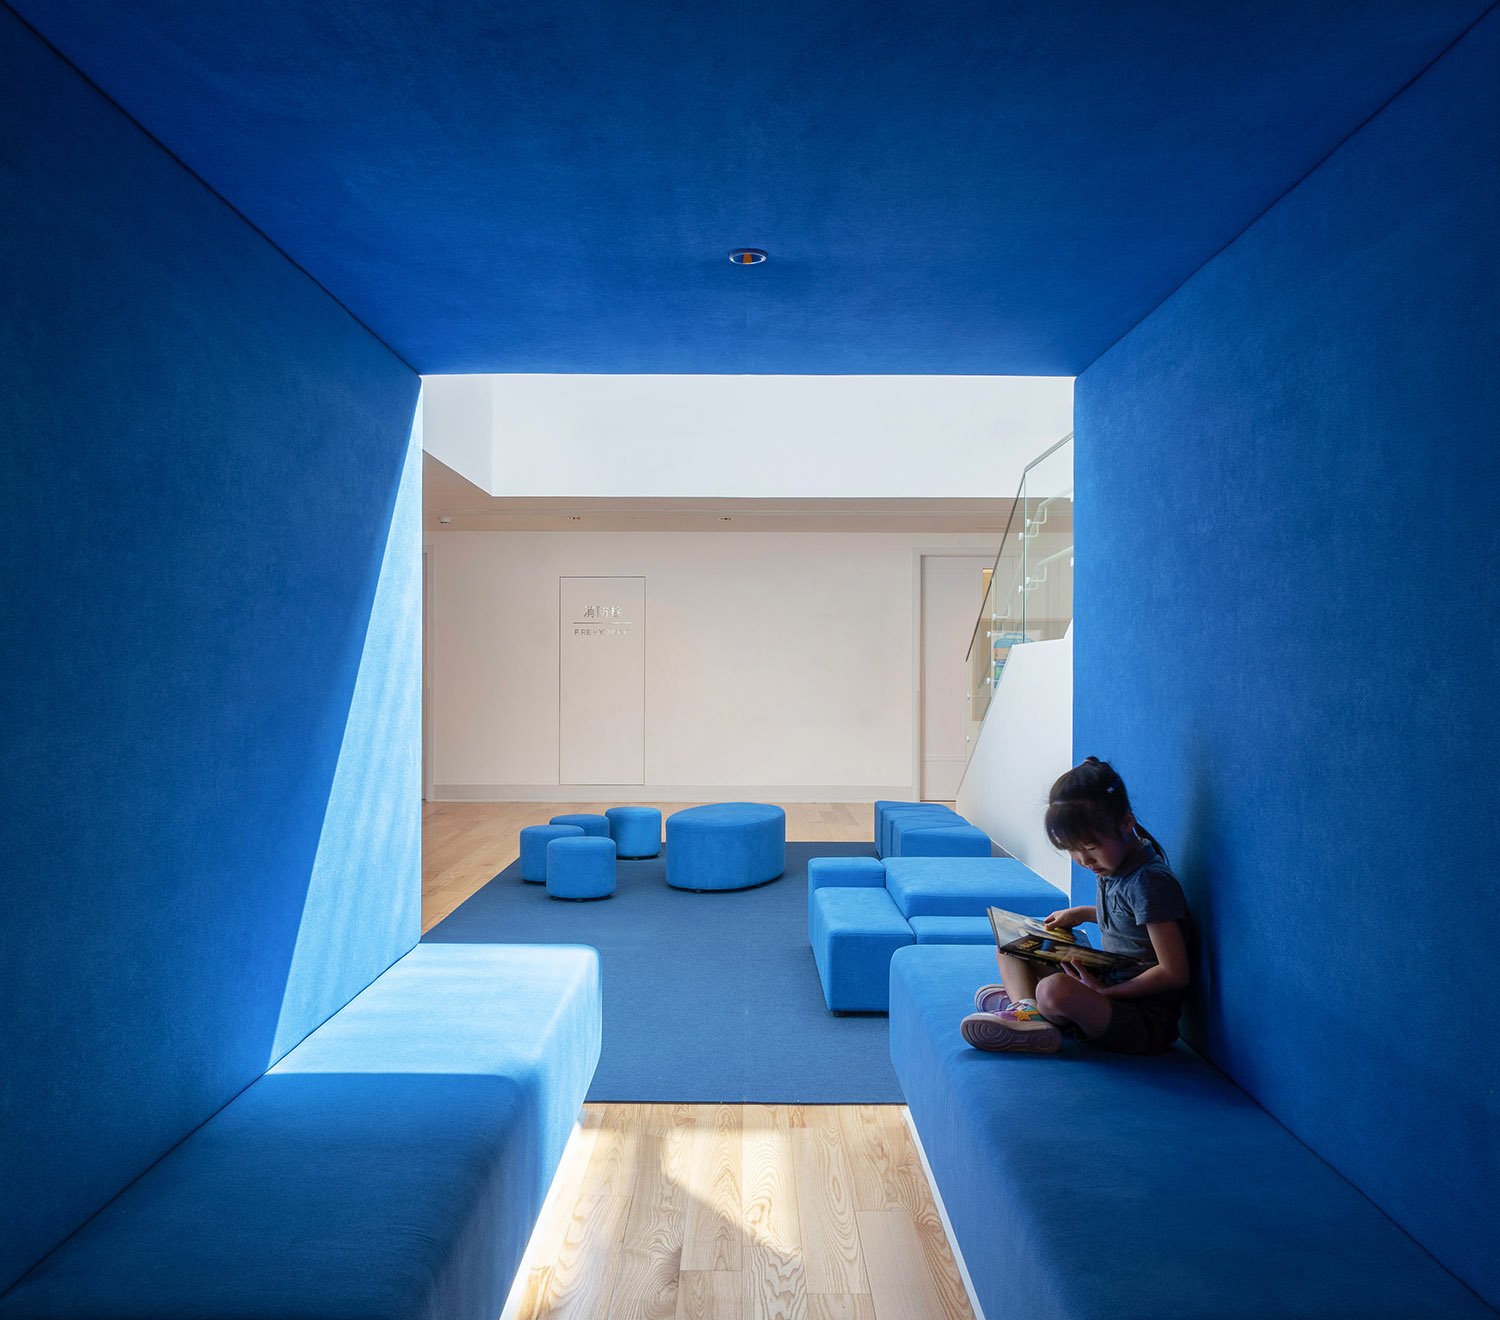 Learning Pods are organized around the atrium as smaller spaces for children to sit quietly. | Zhang Chao